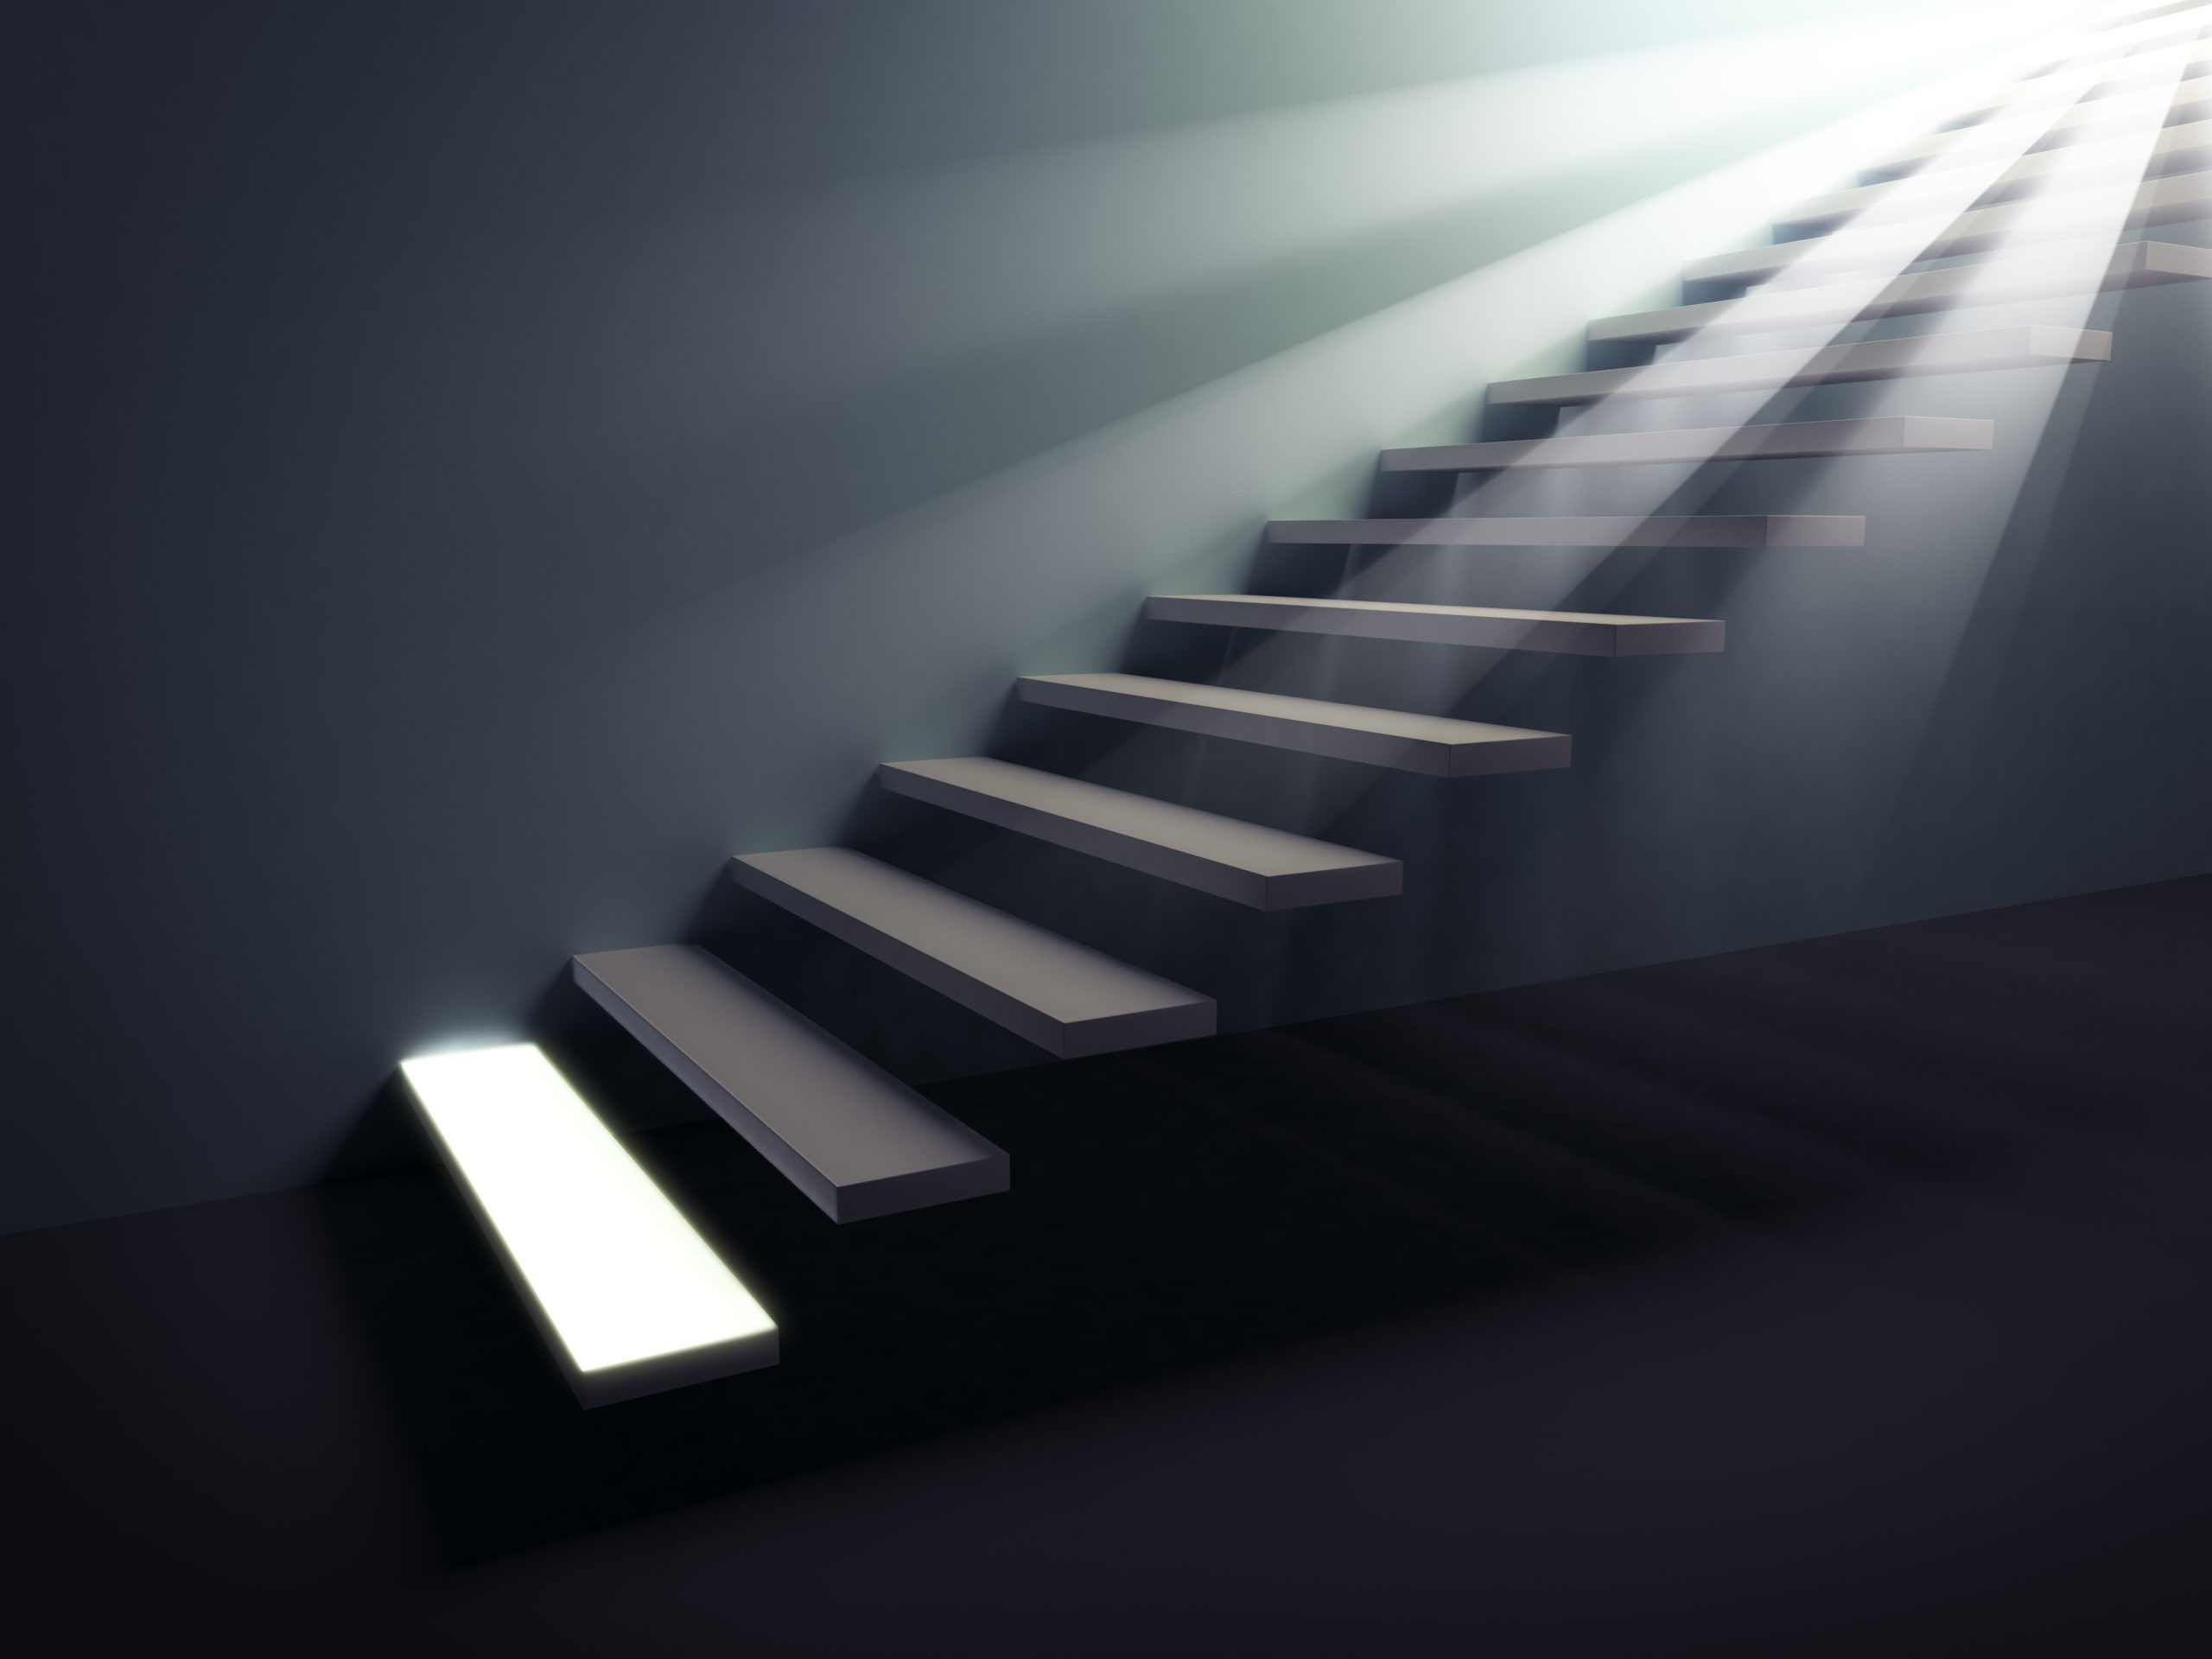 Stairway to the light. First step lit.